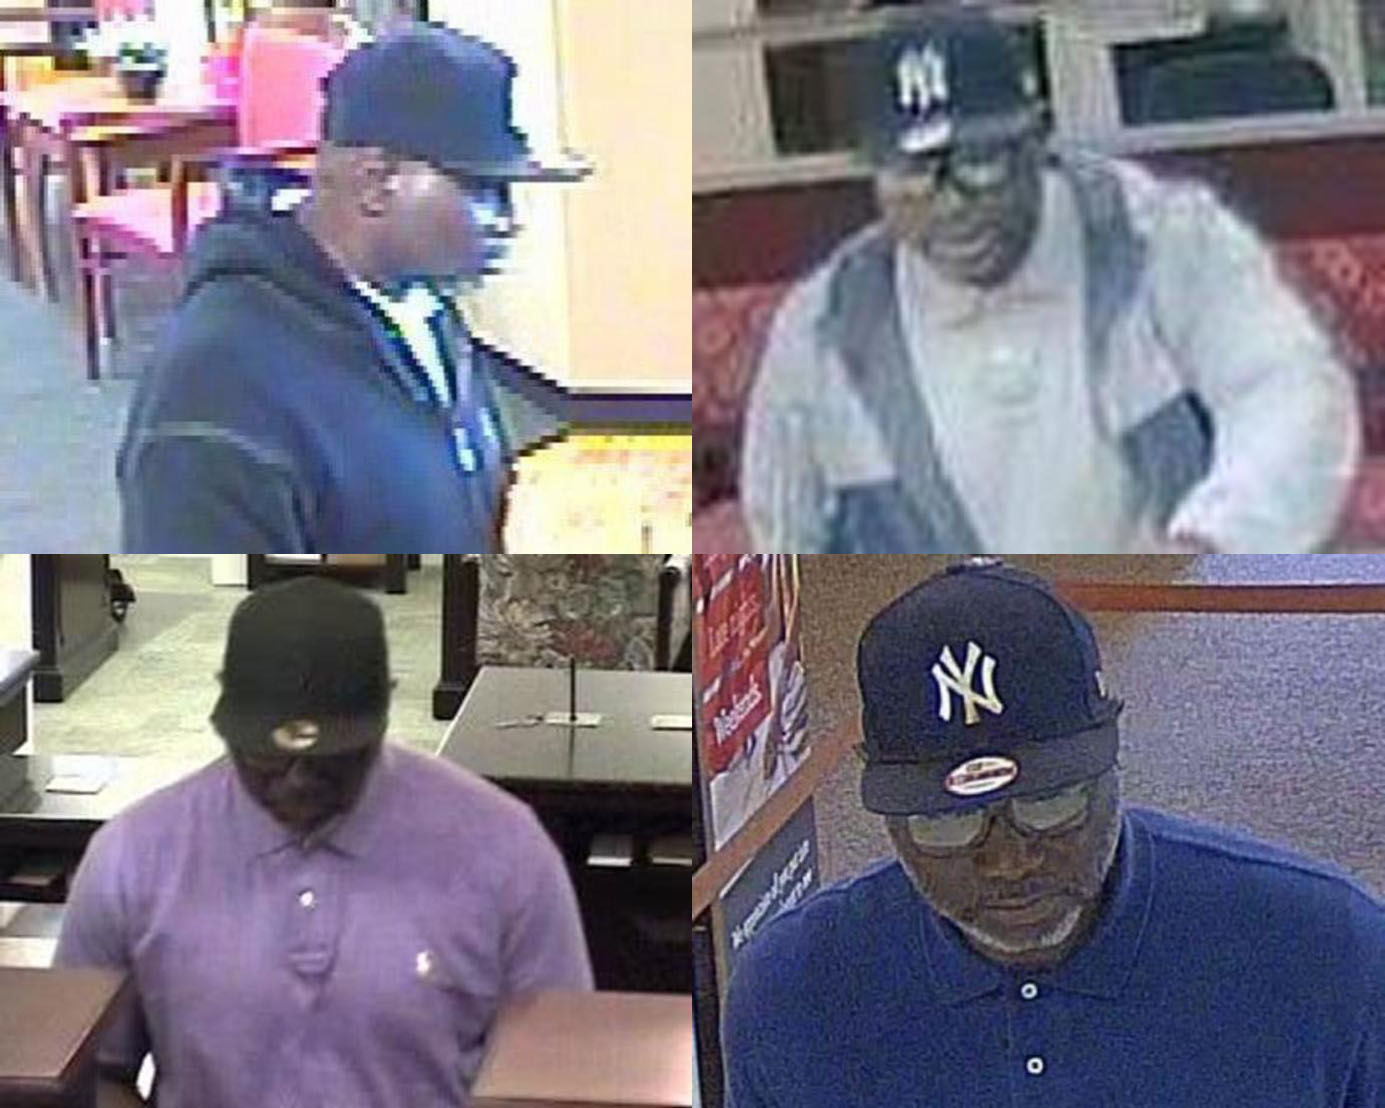 American League Bandit,' Fond Of O's And Yankees Hats, Wanted For